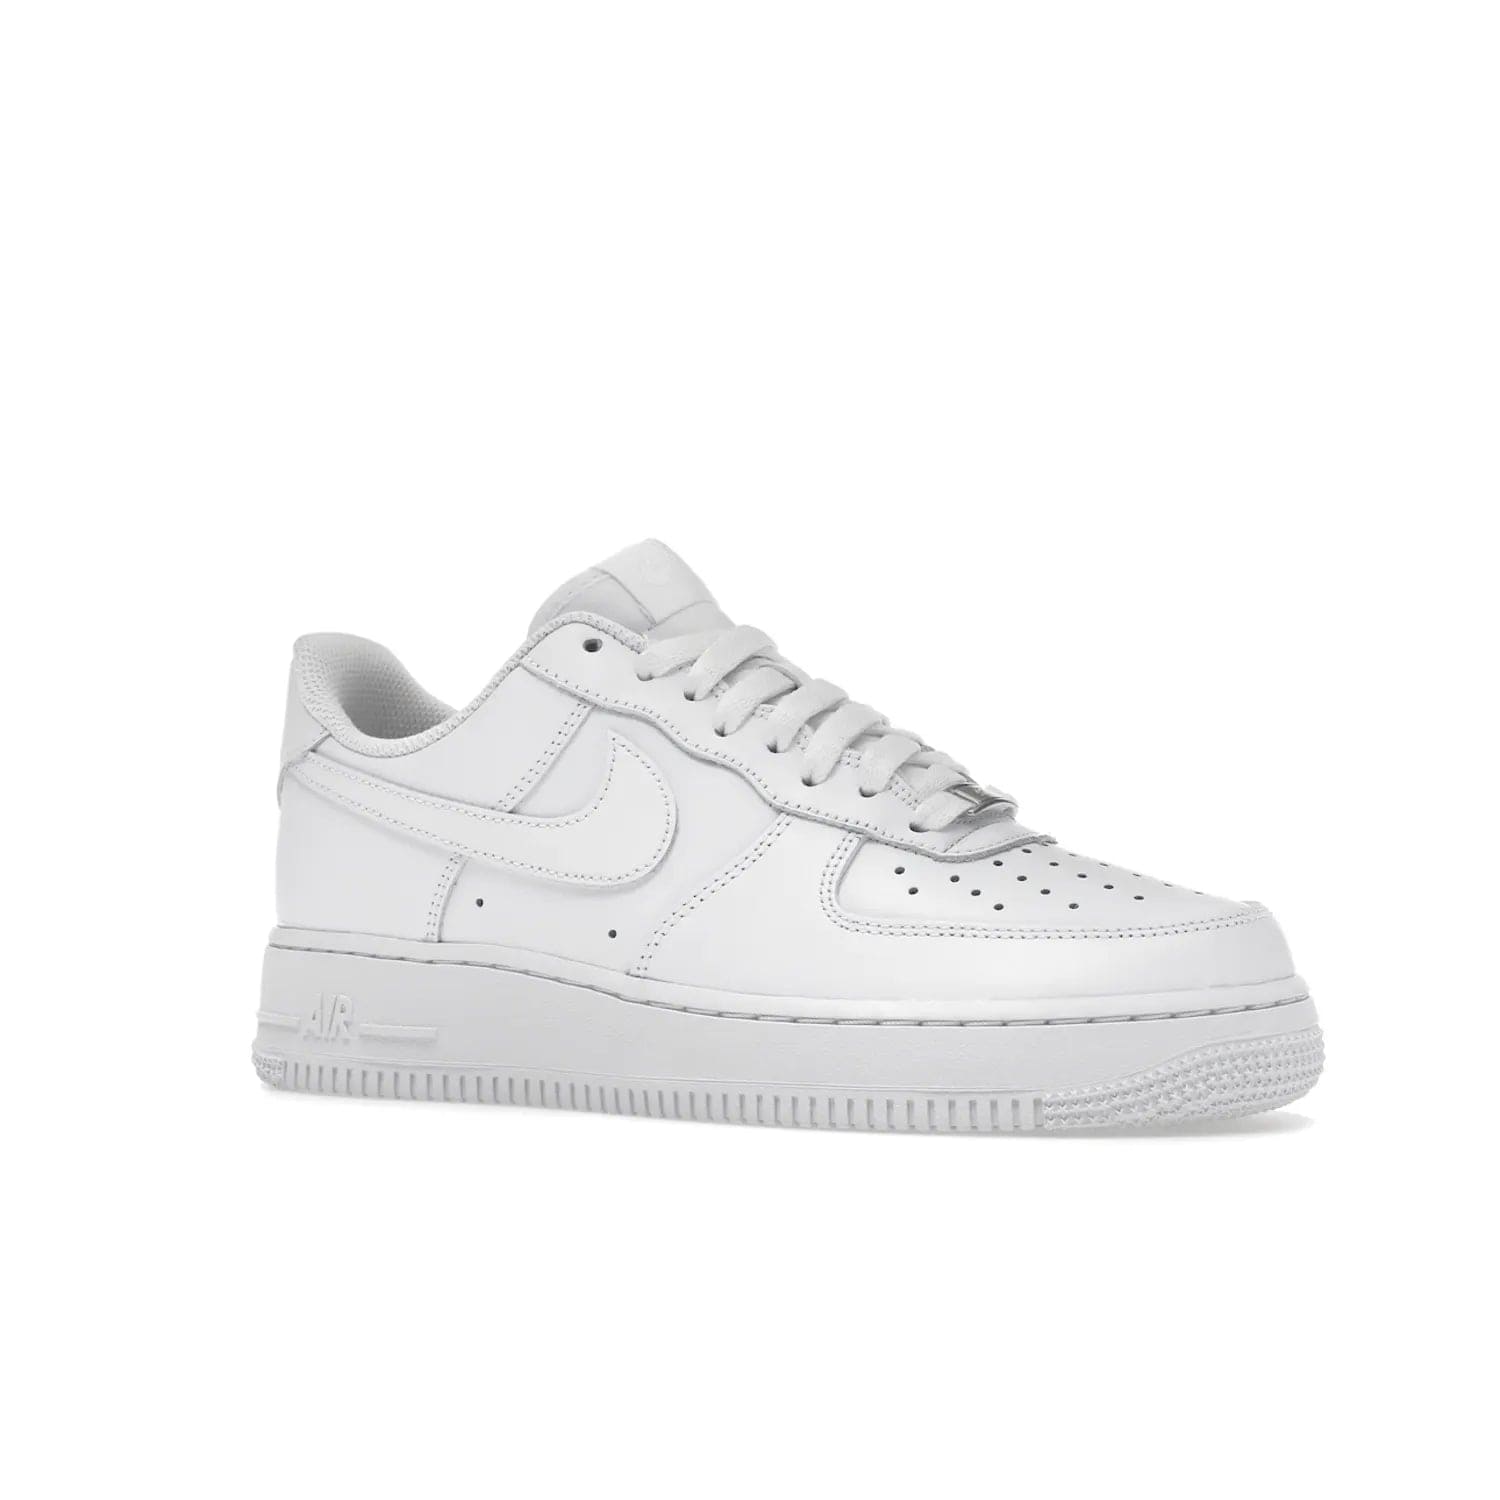 Nike Air Force 1 Low '07 White (Women's) - Image 4 - Only at www.BallersClubKickz.com - Timeless classic sneaker updated with white leather upper and perforated toe box. Nike heel embroidery and white sole. Released January 2018.